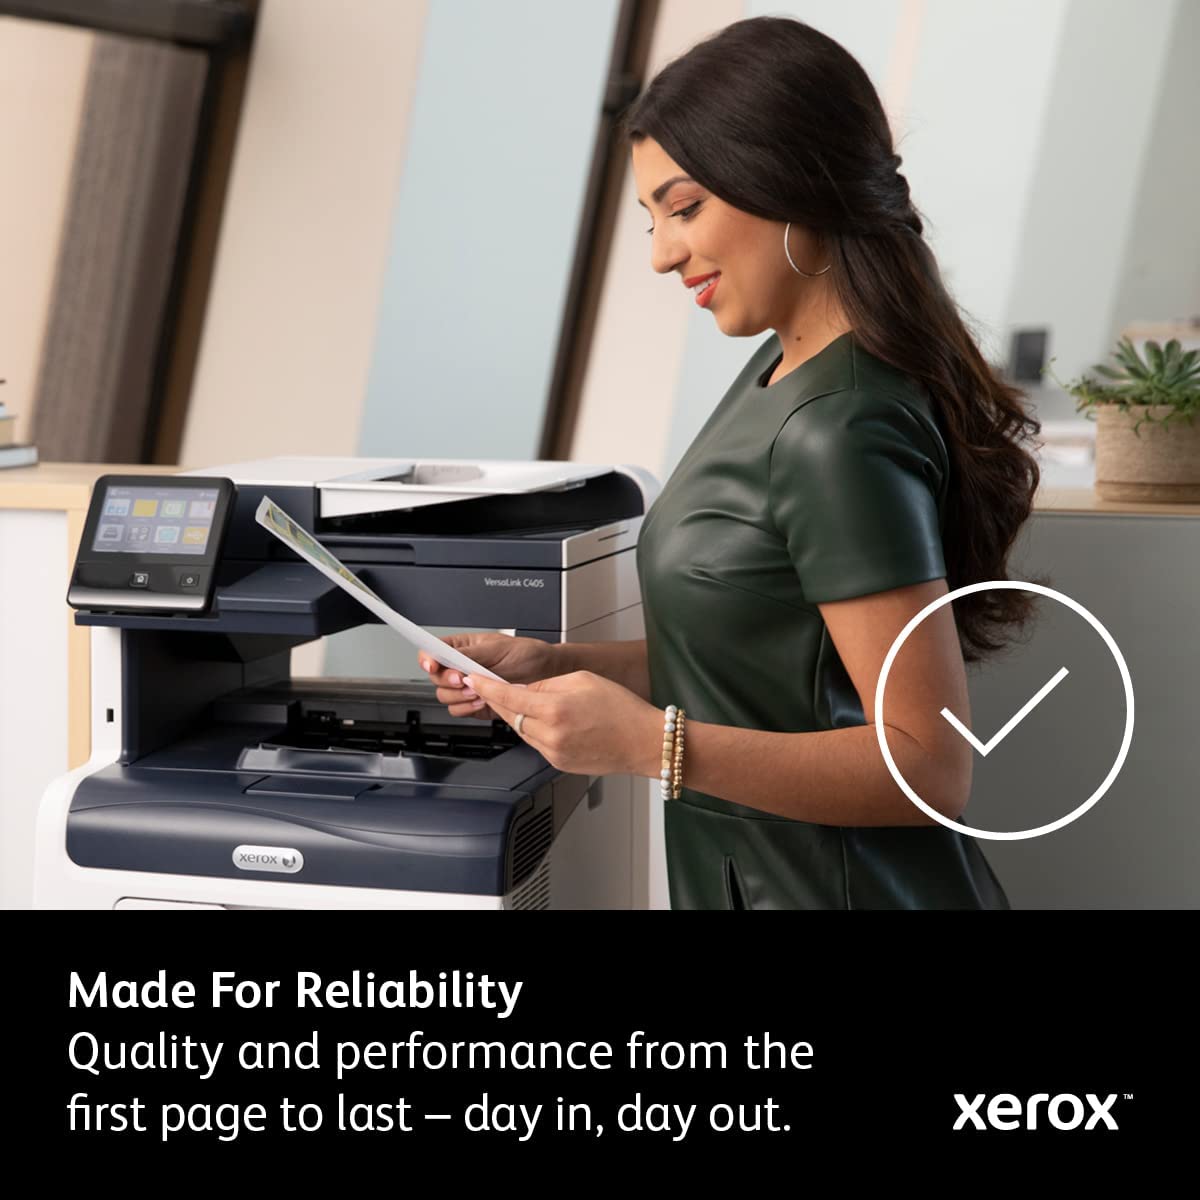 Xerox Phaser 6020/6022 / Workcentre 6025/6027 Cyan Standard Capacity Toner-Cartridge (1,000 Pages) - 106R02756